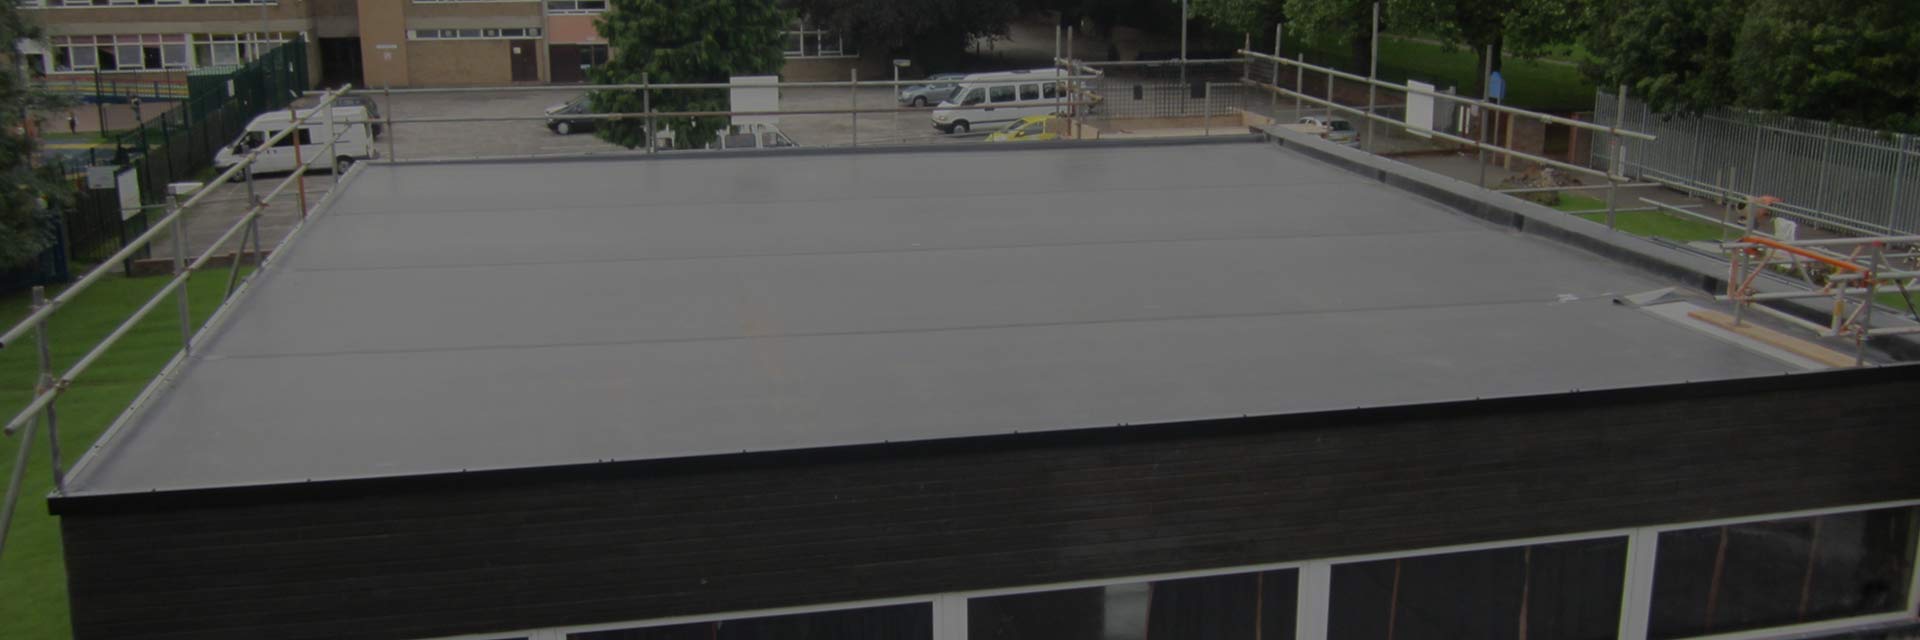 All types of Flat Roofing